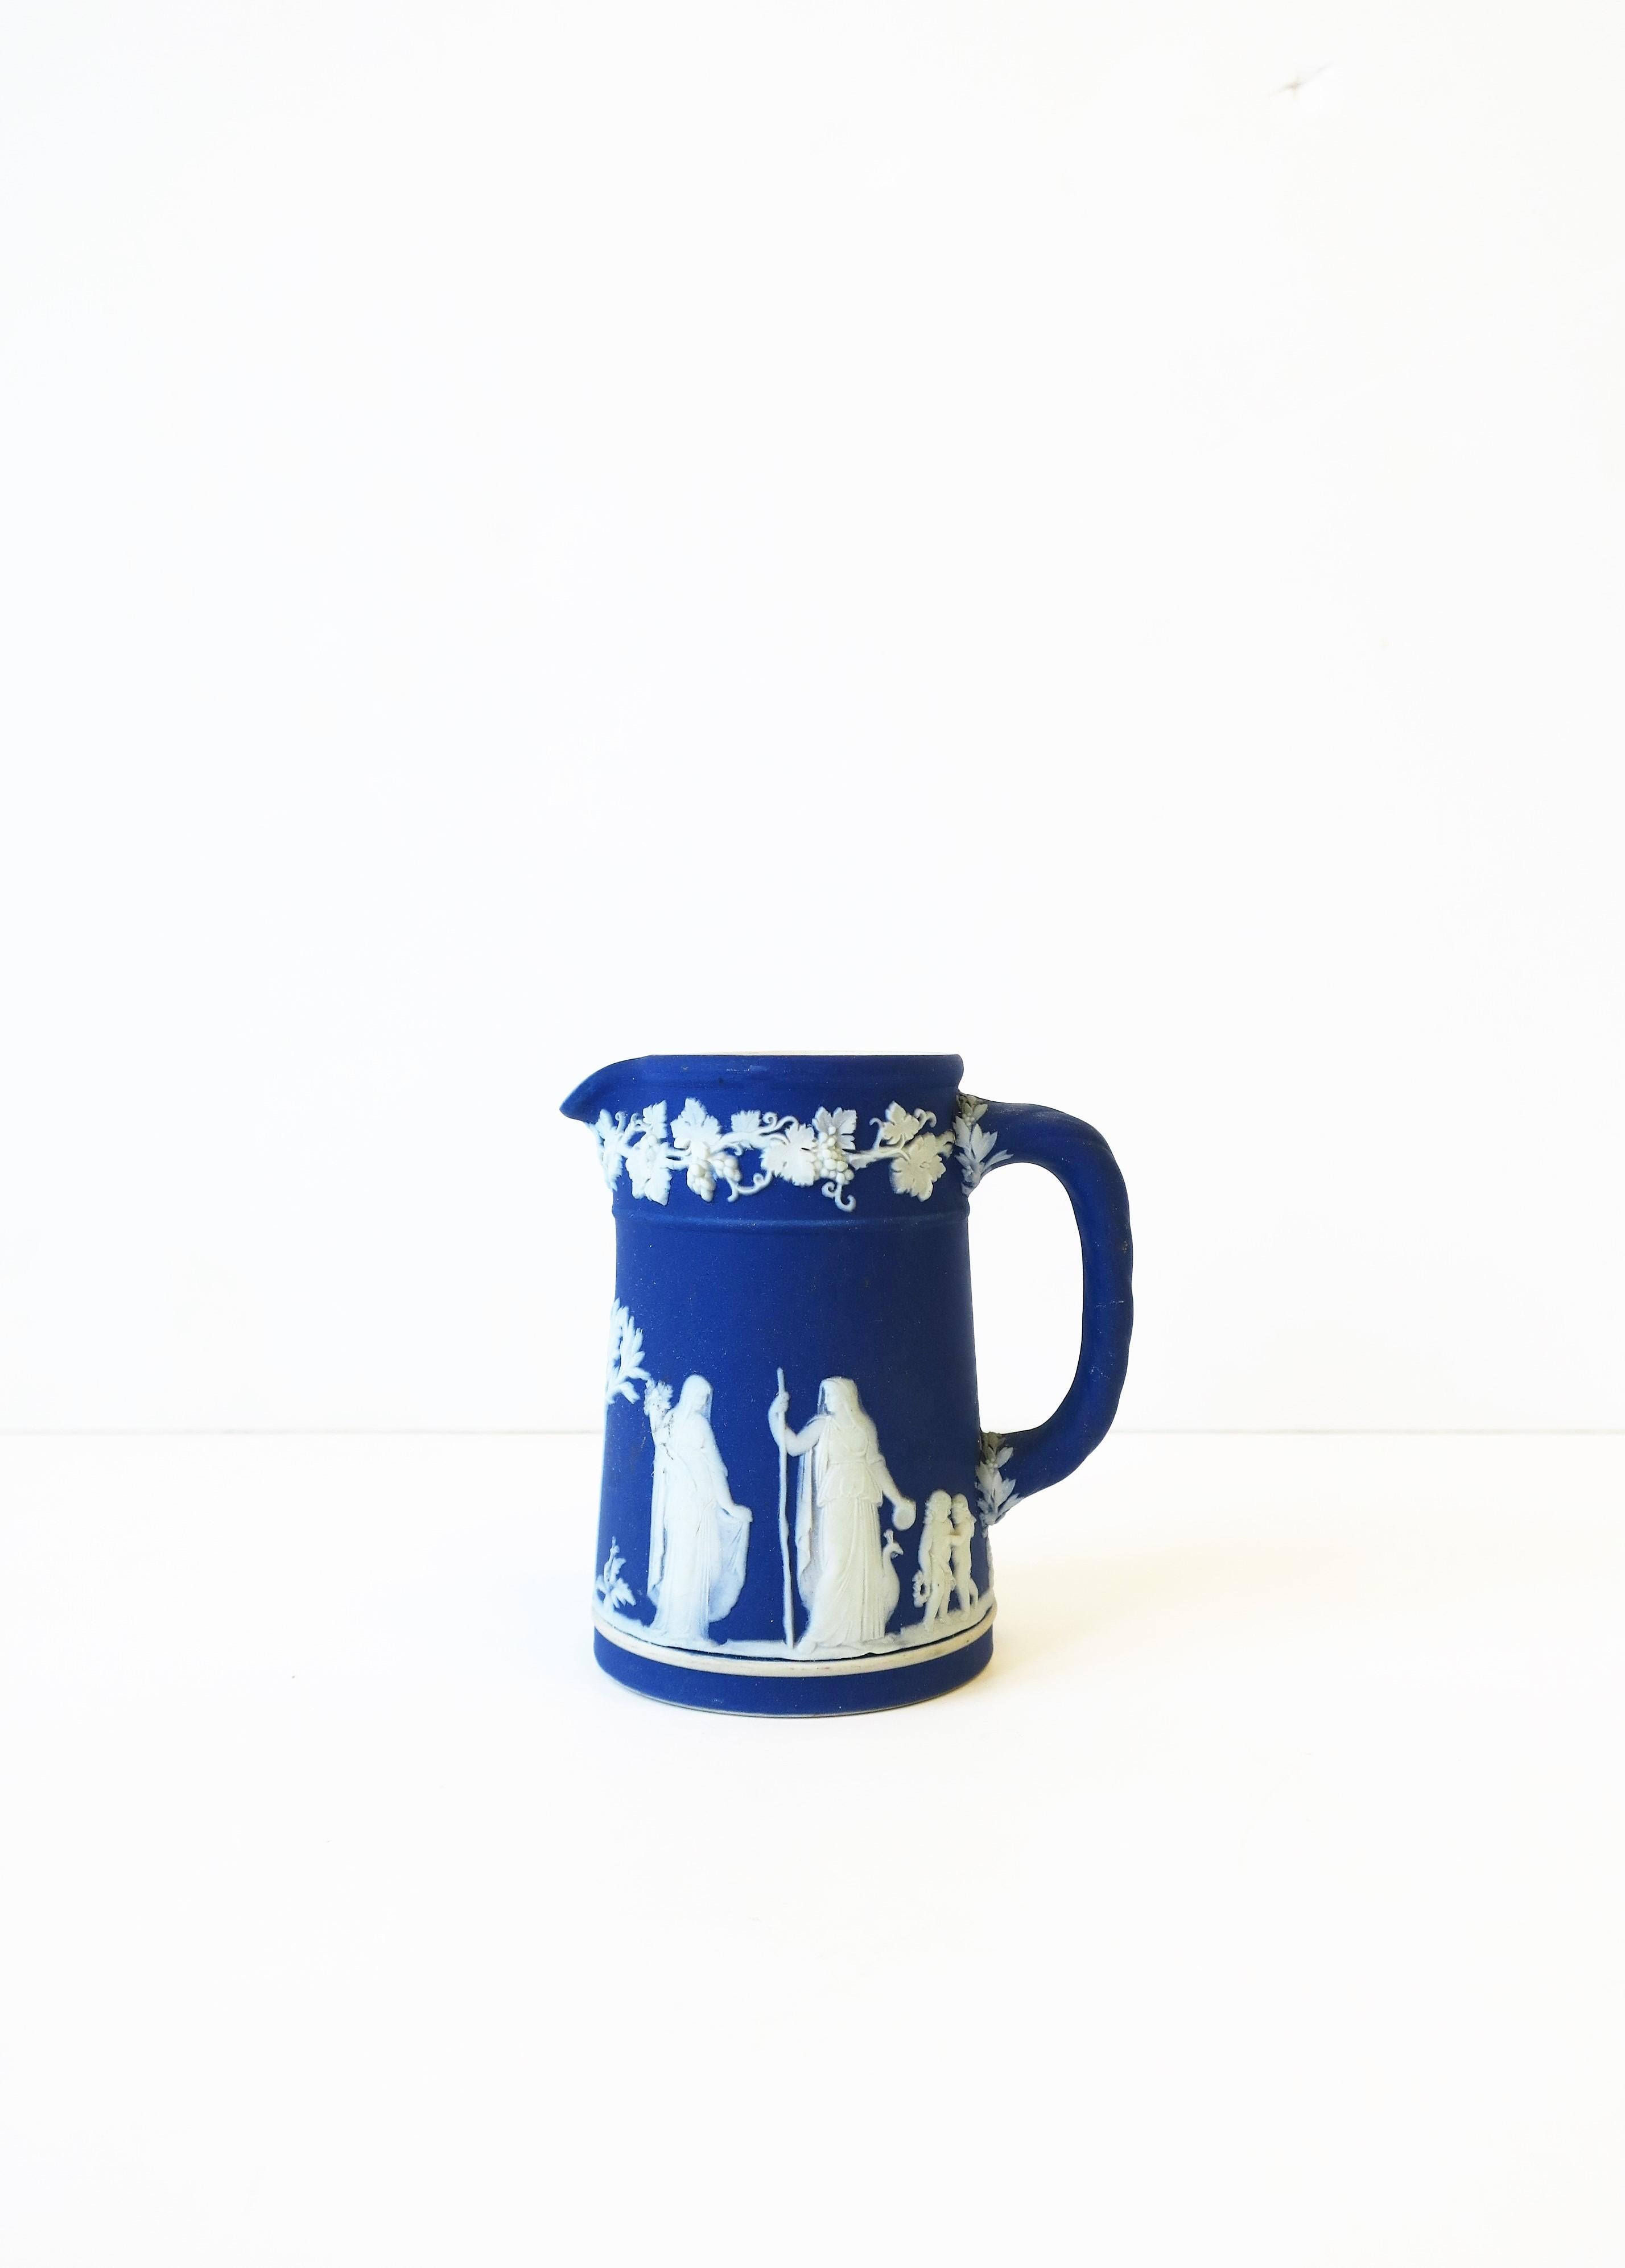 An antique neoclassical Wedgwood Jasperware cobalt blue and white pitcher, made in England, circa late 19th century. Pitcher has a beautiful detailed raised relief on matte unglazed stoneware. With maker's mark on bottom as shown in images: Marks